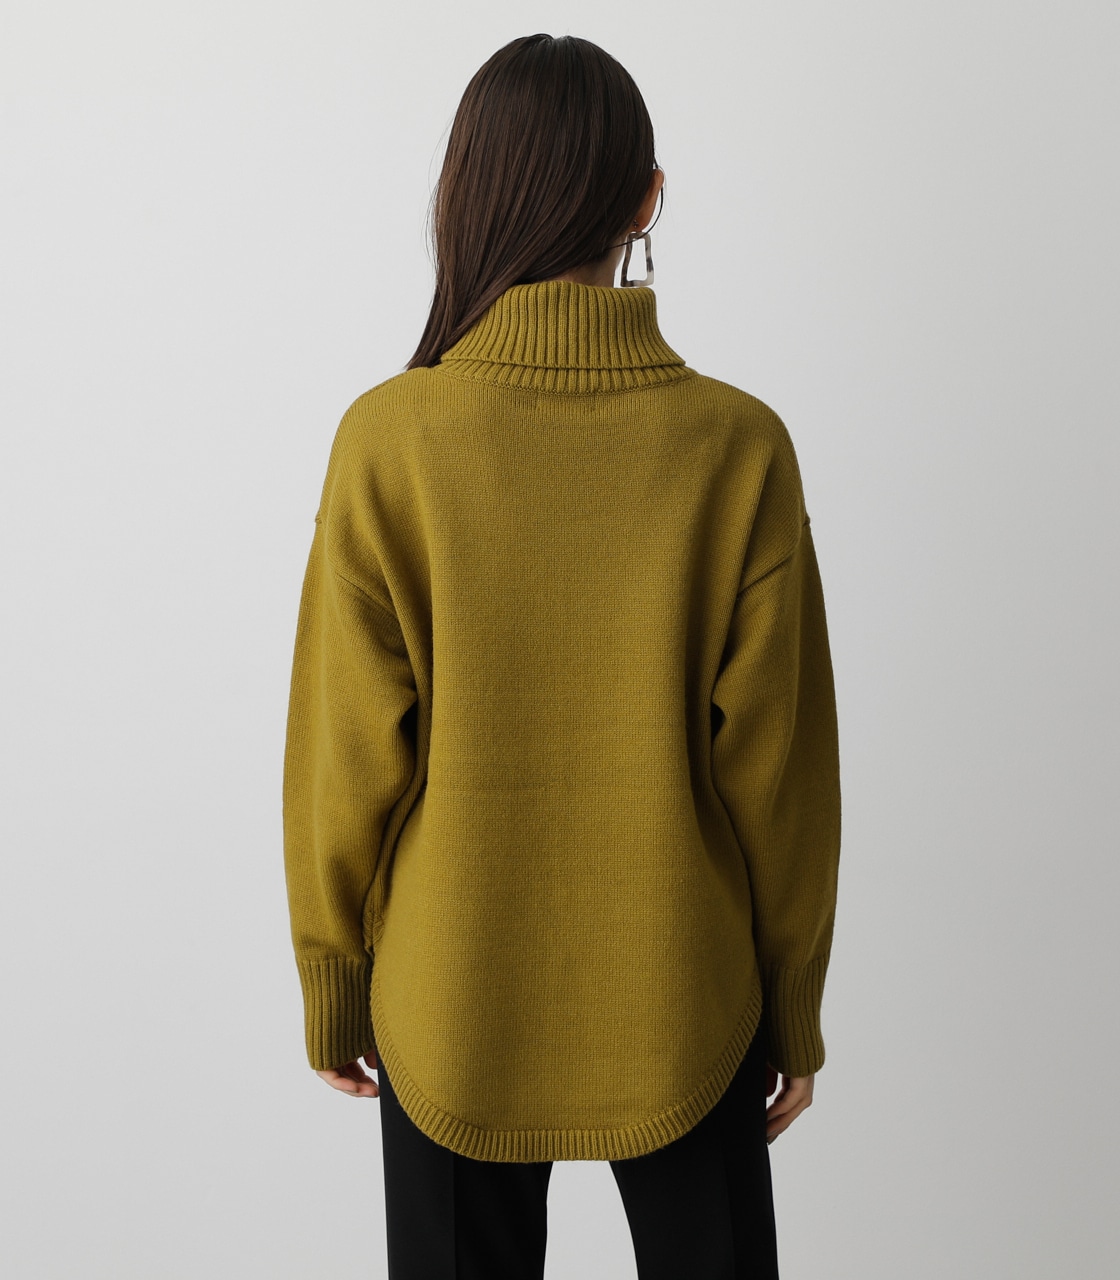 BIG TURTLE KNIT TOPS/ビッグタートルニットトップス 詳細画像 LIME 7